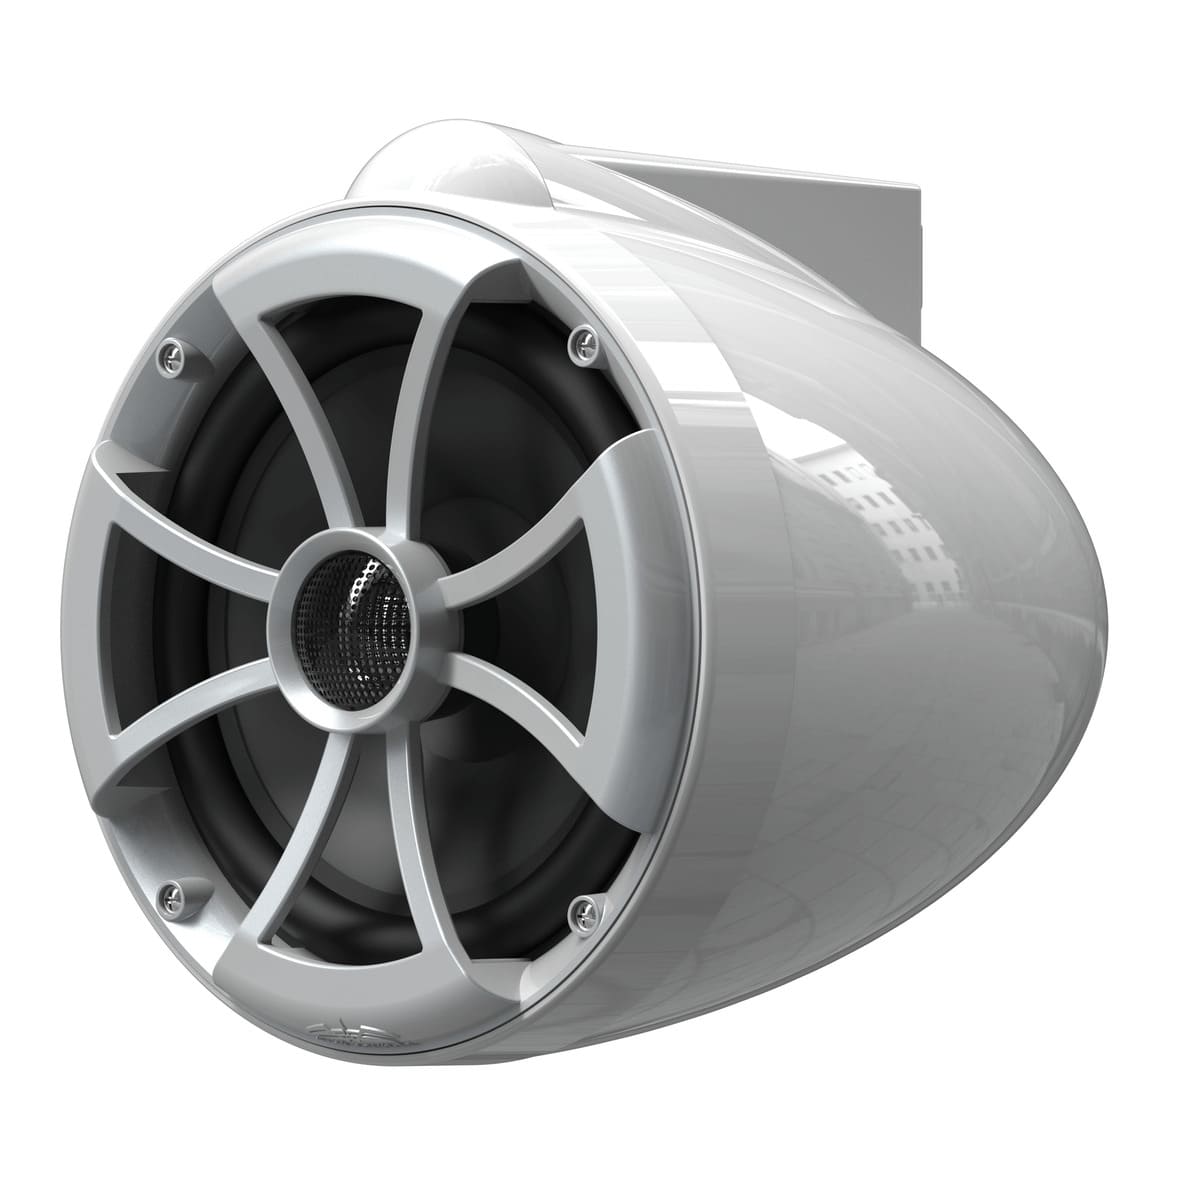 Wet Sounds ICON Series 8" White Tower Speakers